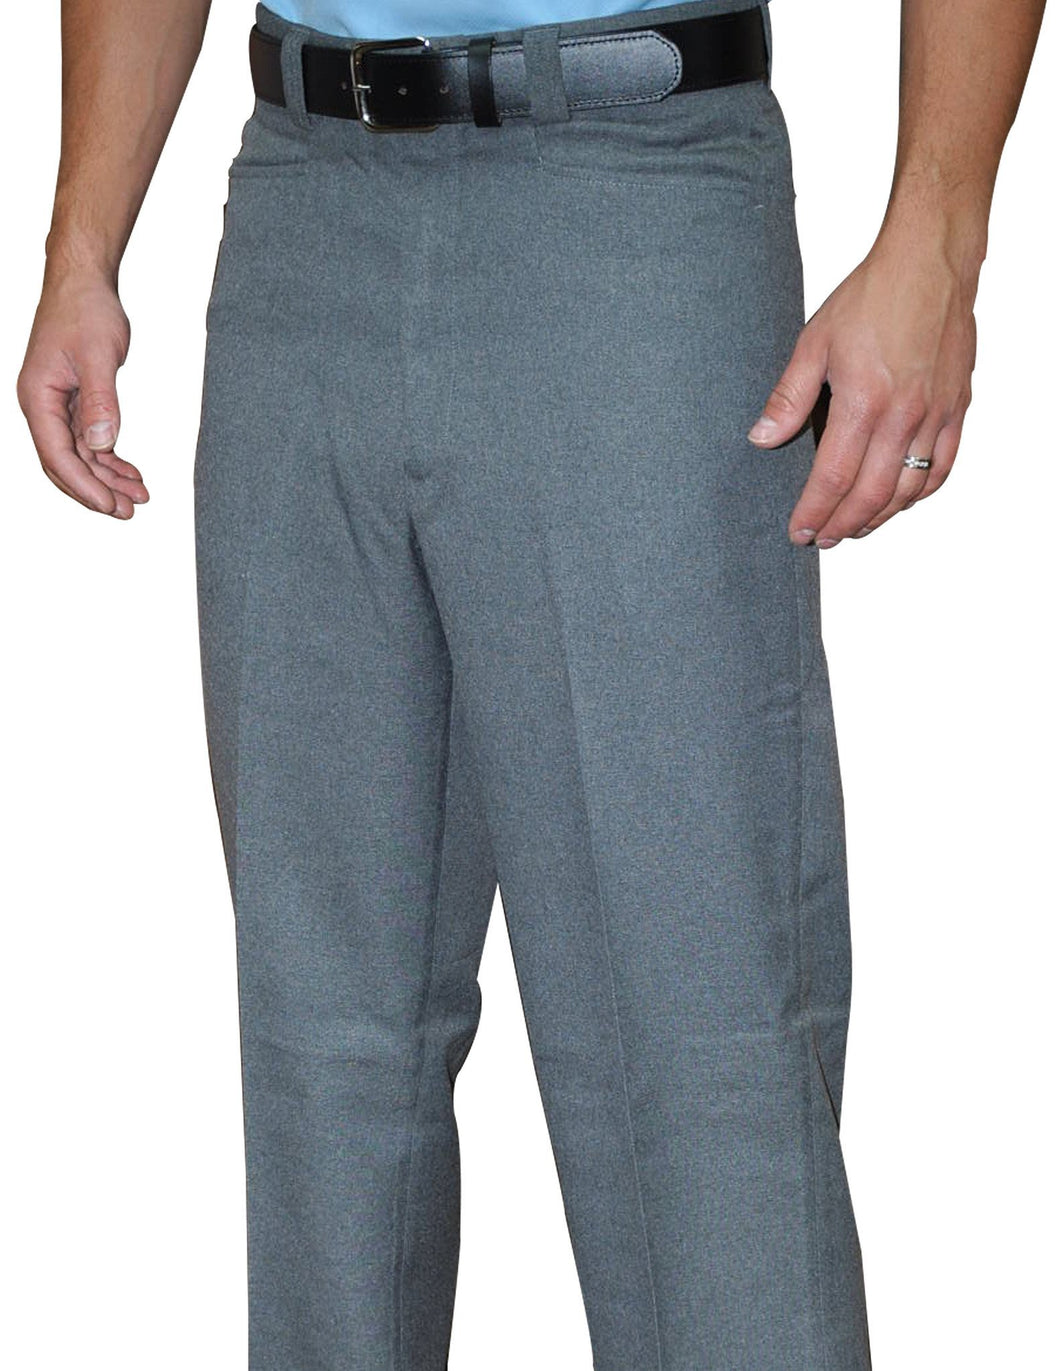 BBS380-Smitty Flat Front Plate Pants - Heather Grey Only